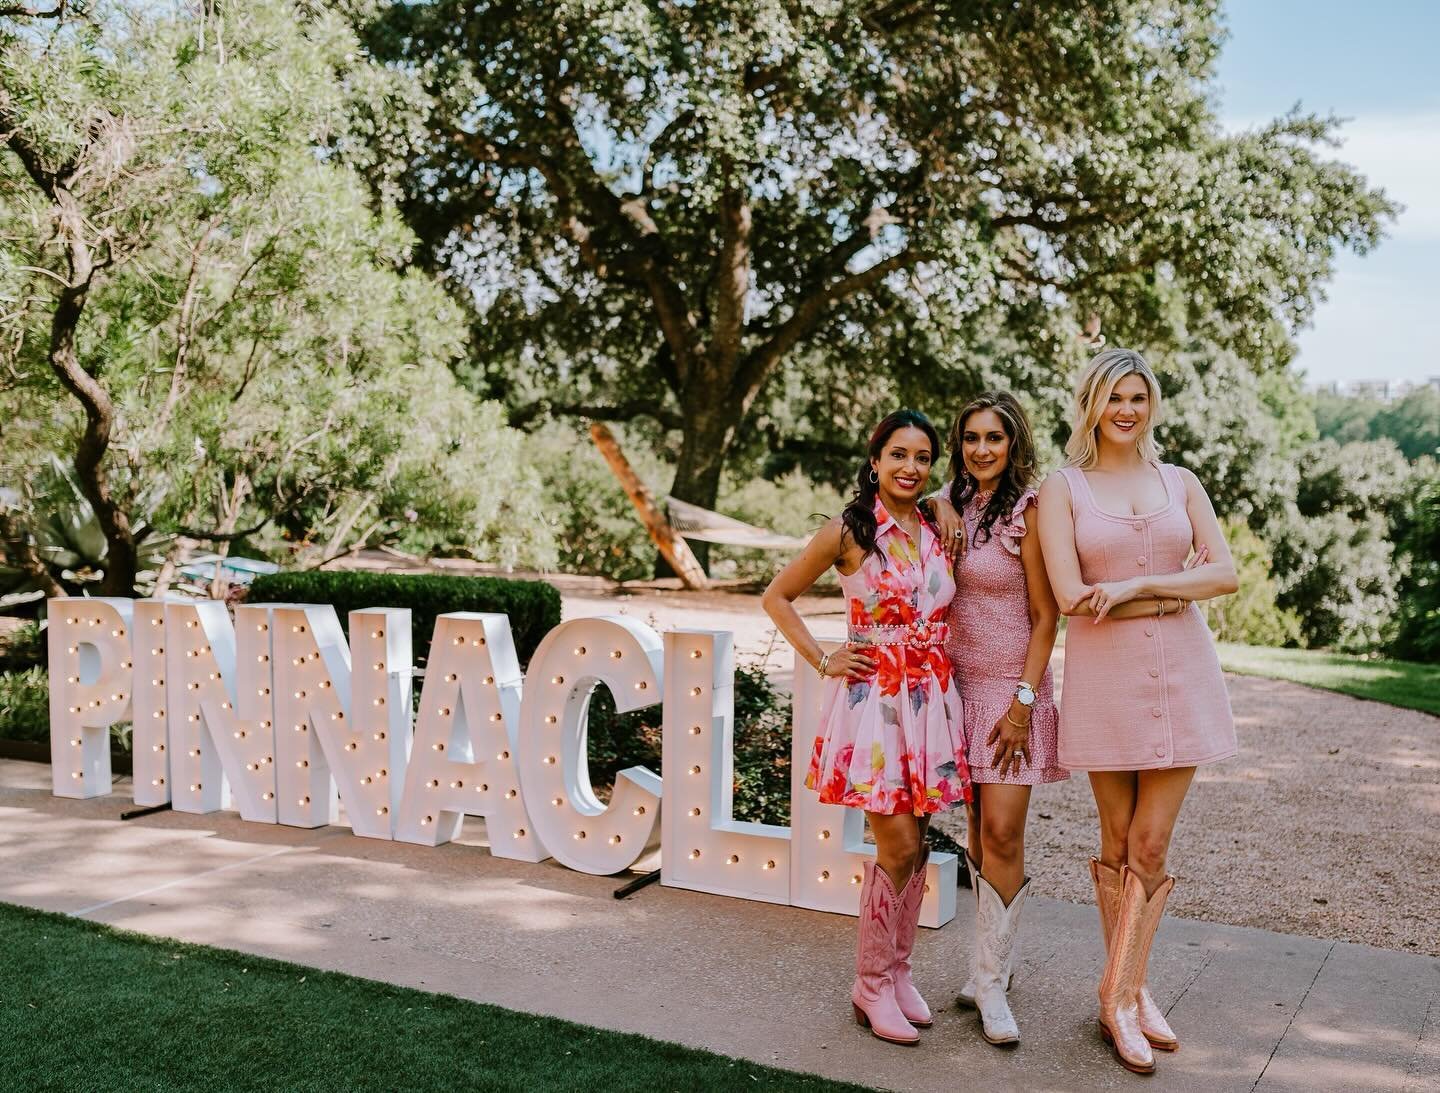 Absolutely the best @pinnacleconference yet in Austin. Beyond thankful to all of you who supported our dream and have made this little conference a COMMUNITY. Inspired is an understatement. 

Registration is now open for Pinnacle 2025!! 
Join us in A